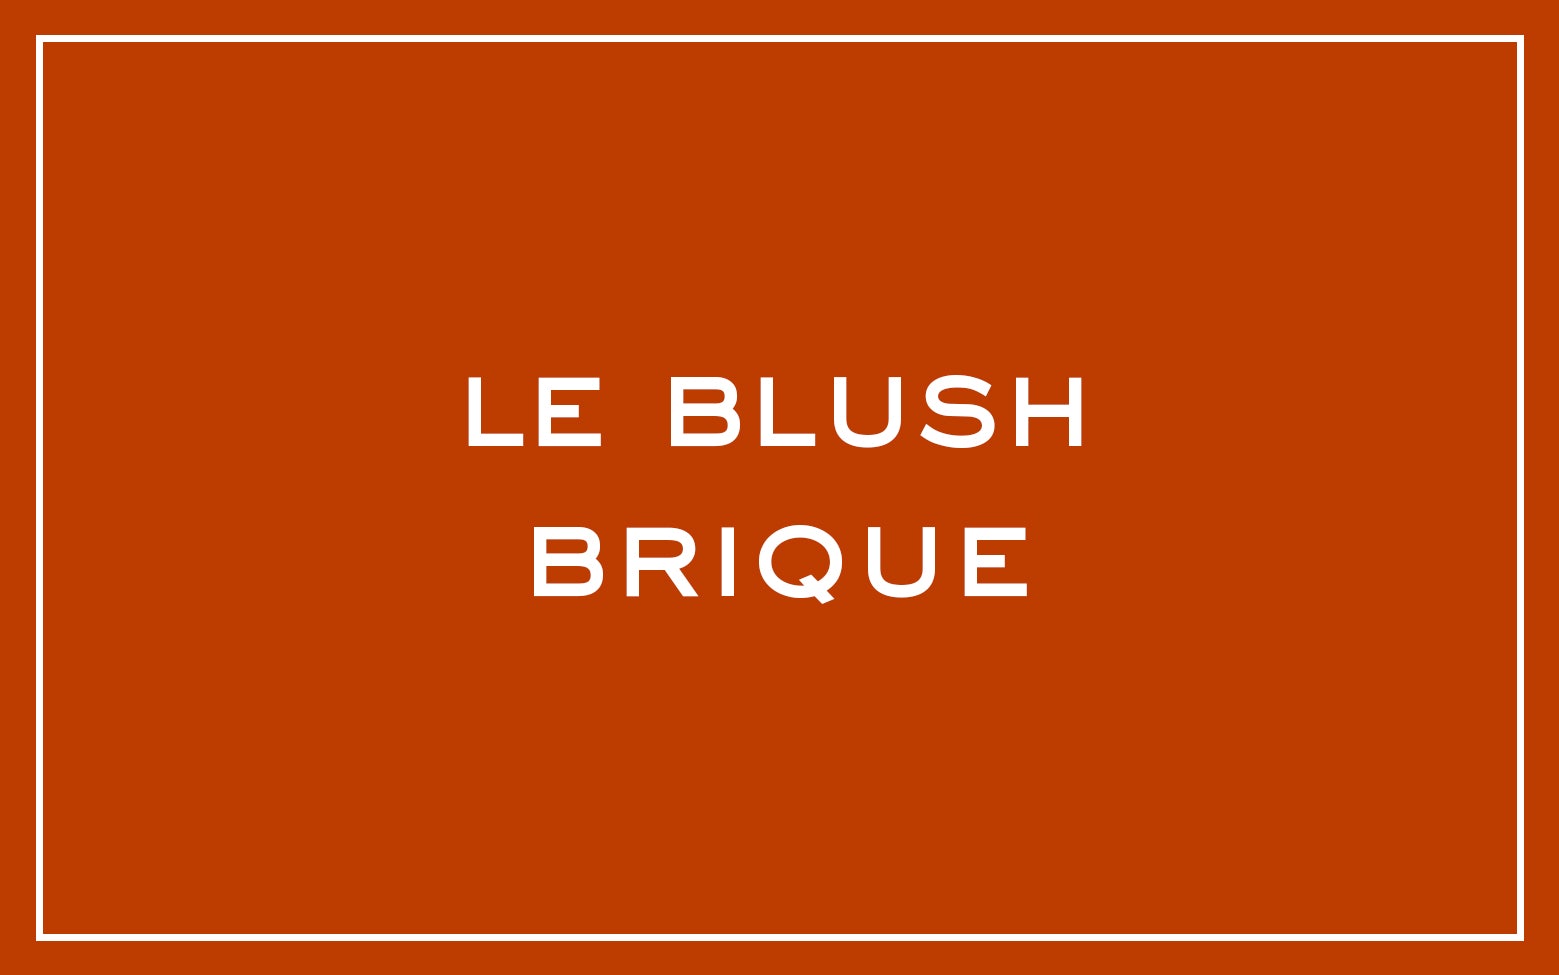 La bouche rouge The Brick Red Blush color swatch with text